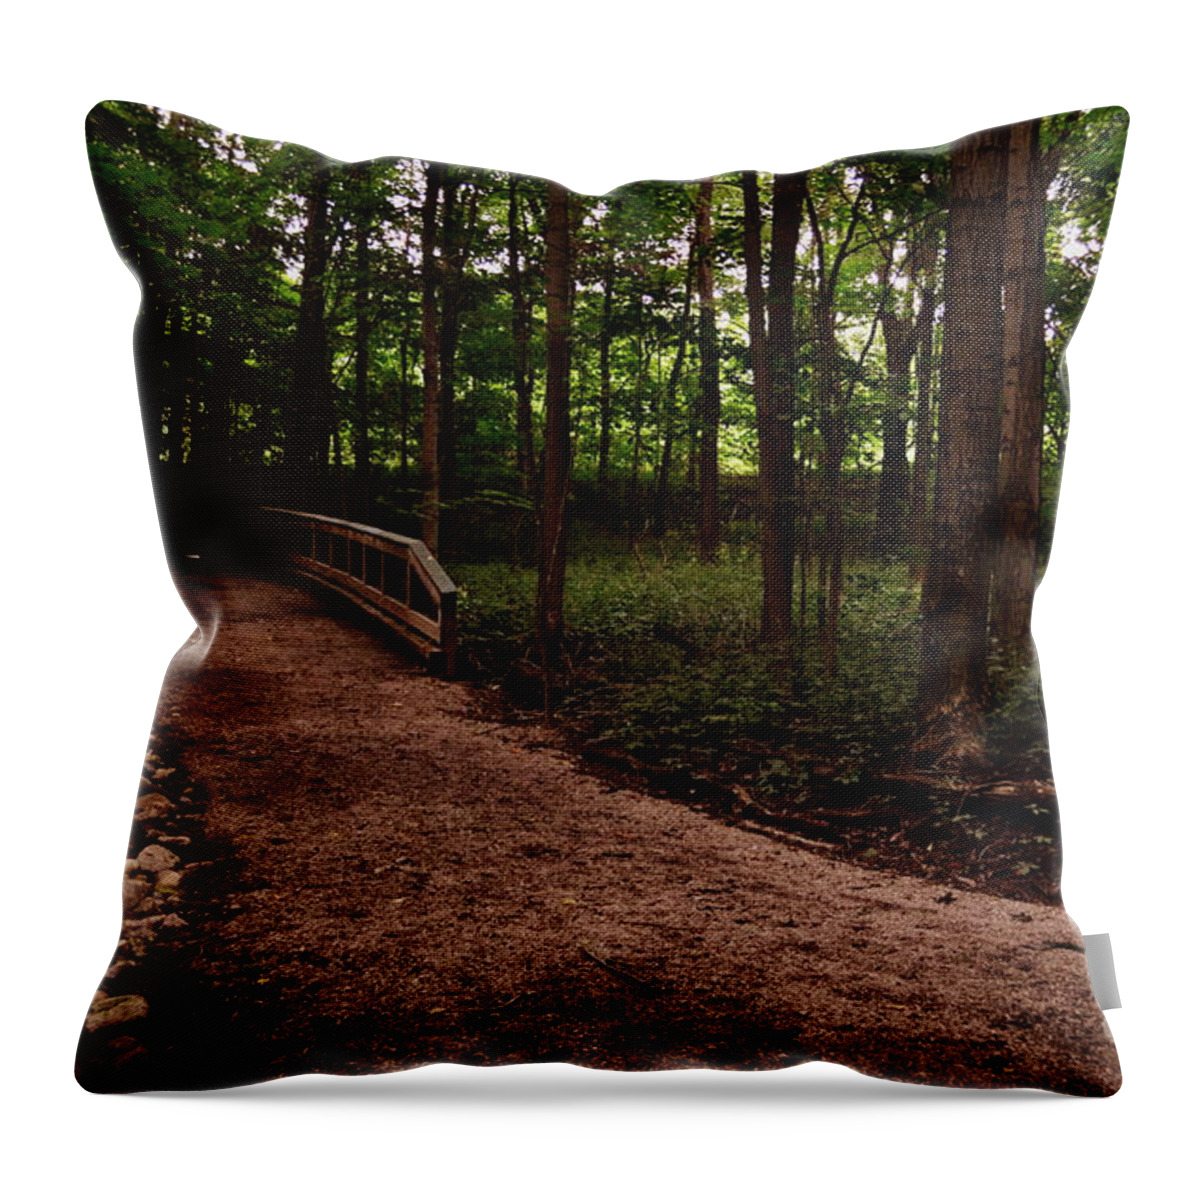 Wood Bridge Throw Pillow featuring the photograph Wood Bridge in Forest by Amy Lucid